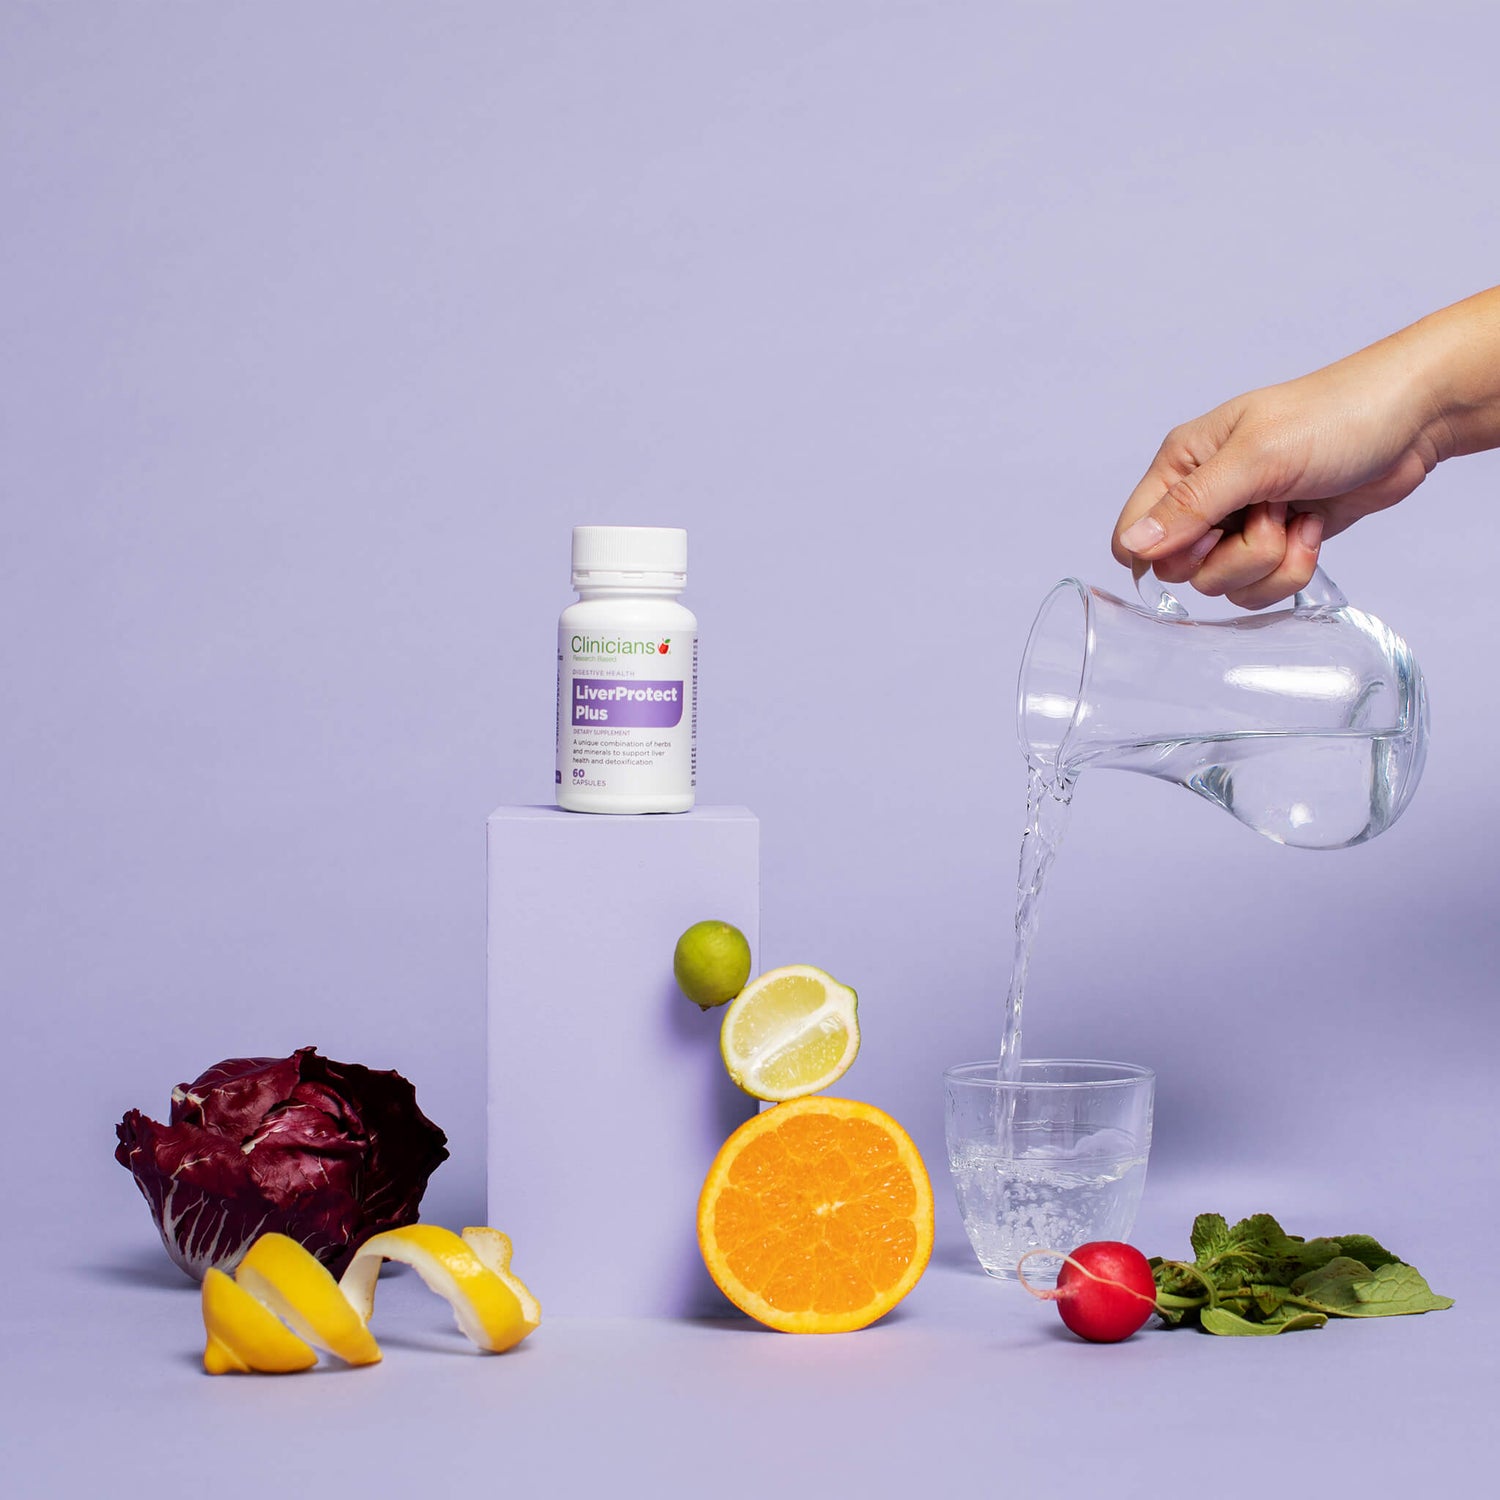 Product packaging, surrounded by fruit and water pouring into glass